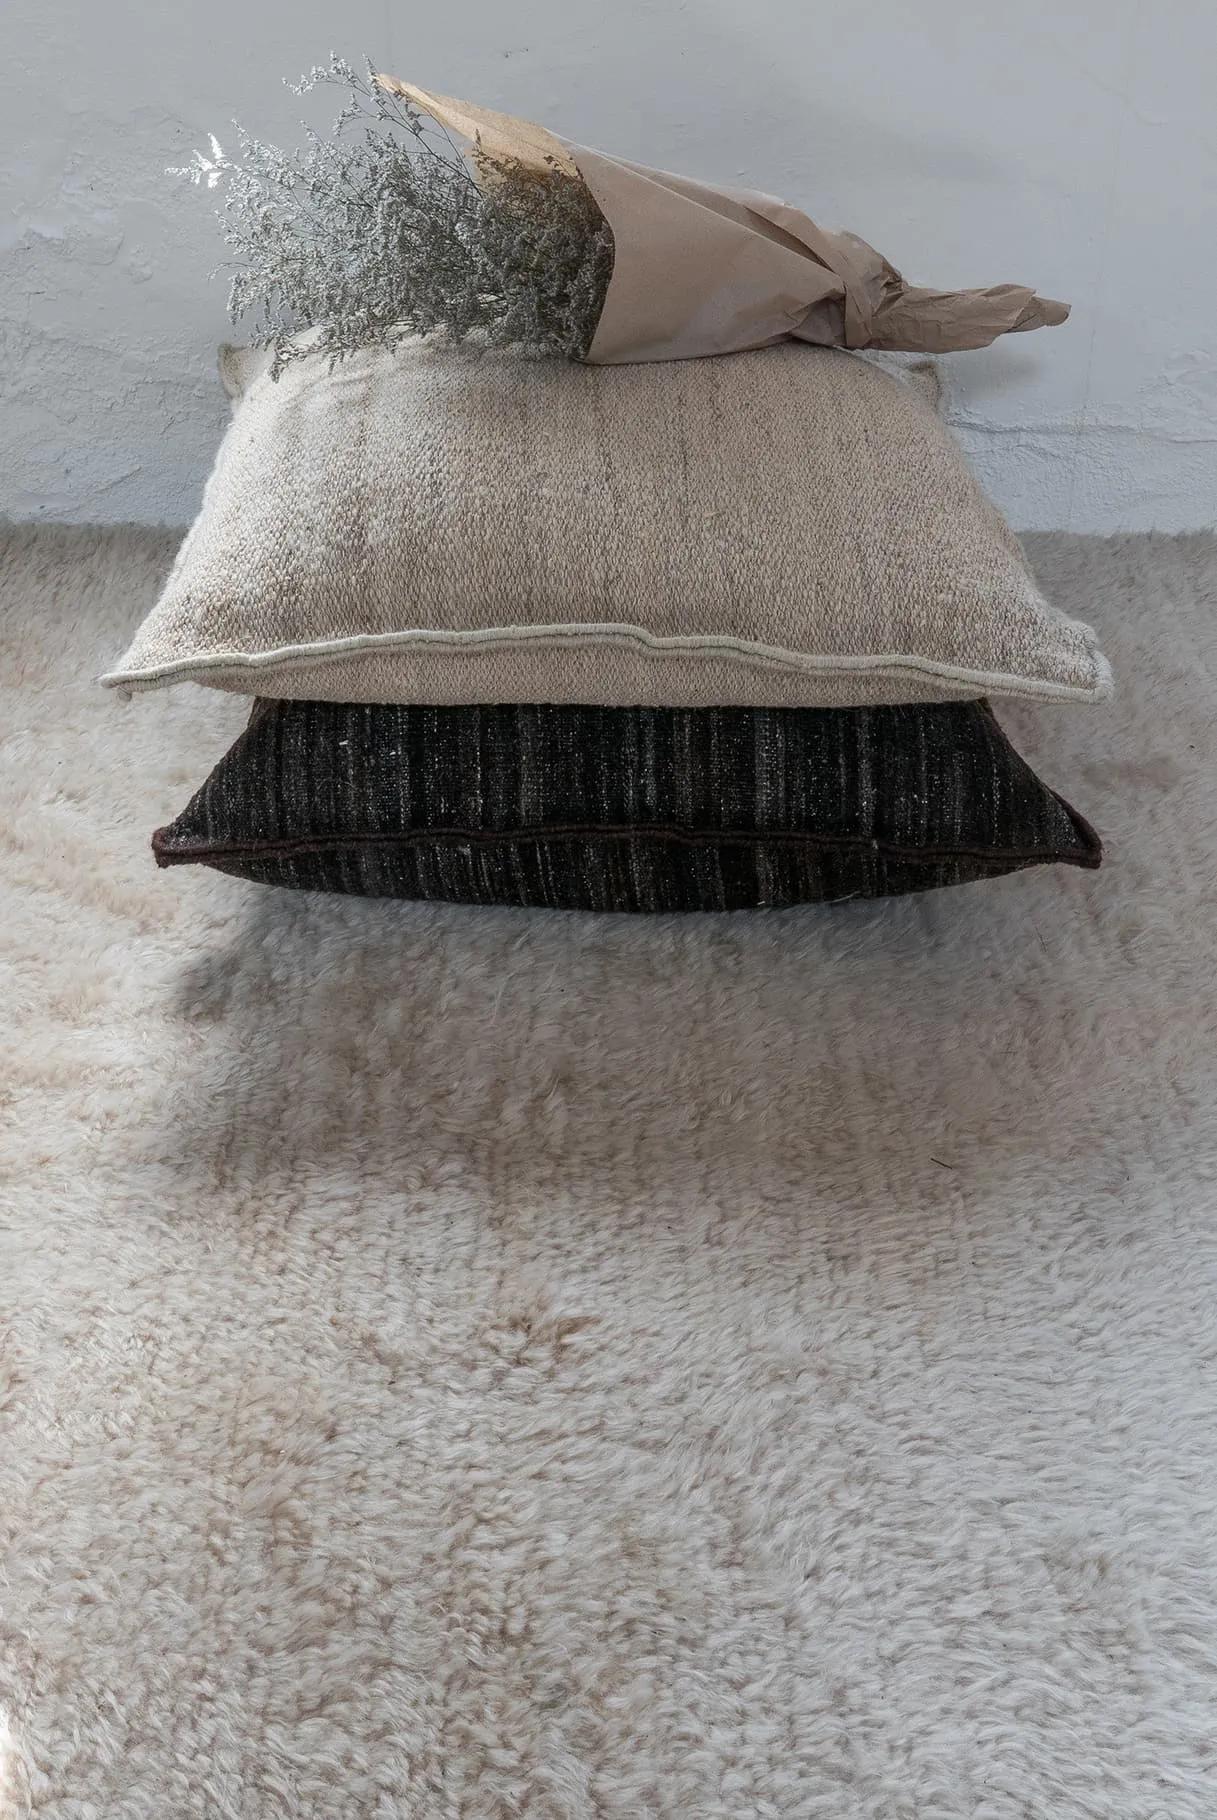 'Wellbeing' heavy kilim cushion by Ilse Crawford for Nanimarquina.

Executed in 100% hand-spun Afghan wool and filled with 100% cork, this cushion adds warmth, softness and comfort to any indoor setting. The 'Wellbeing' collection uses only